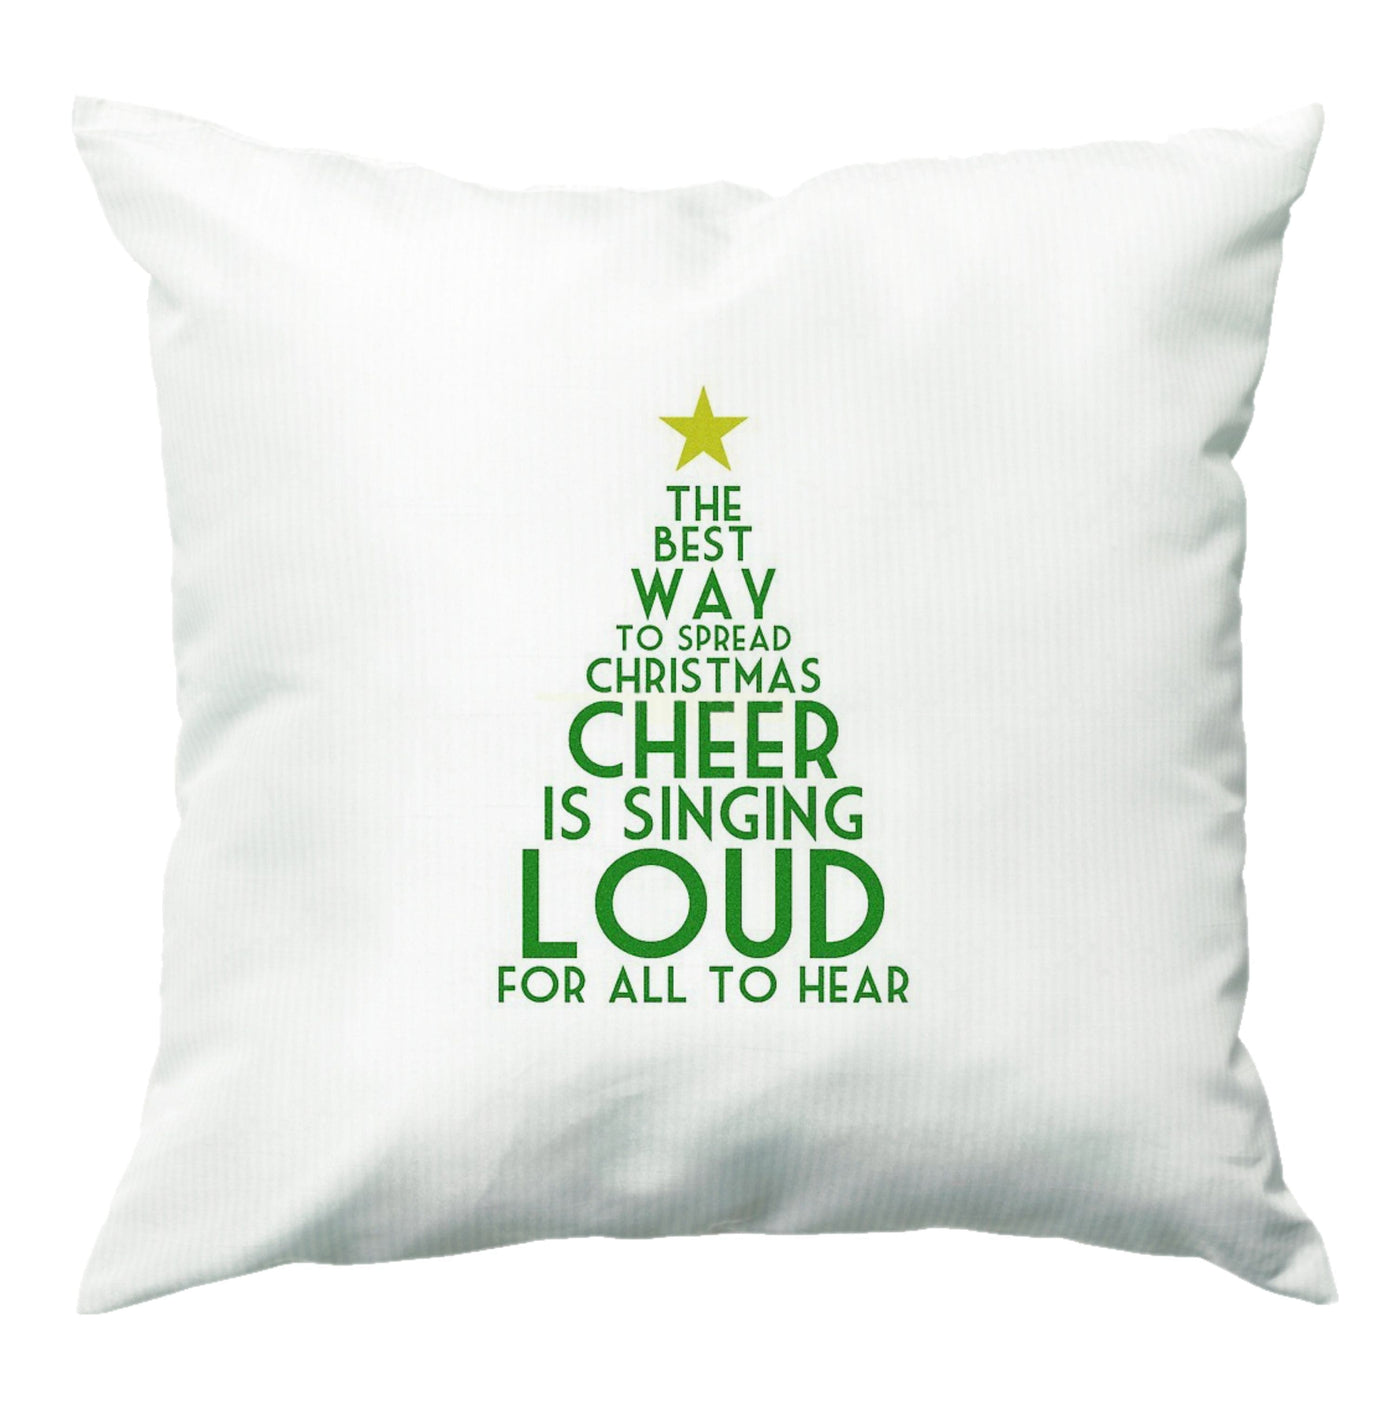 The Best Way To Spread Christmas Cheer - Elf Cushion